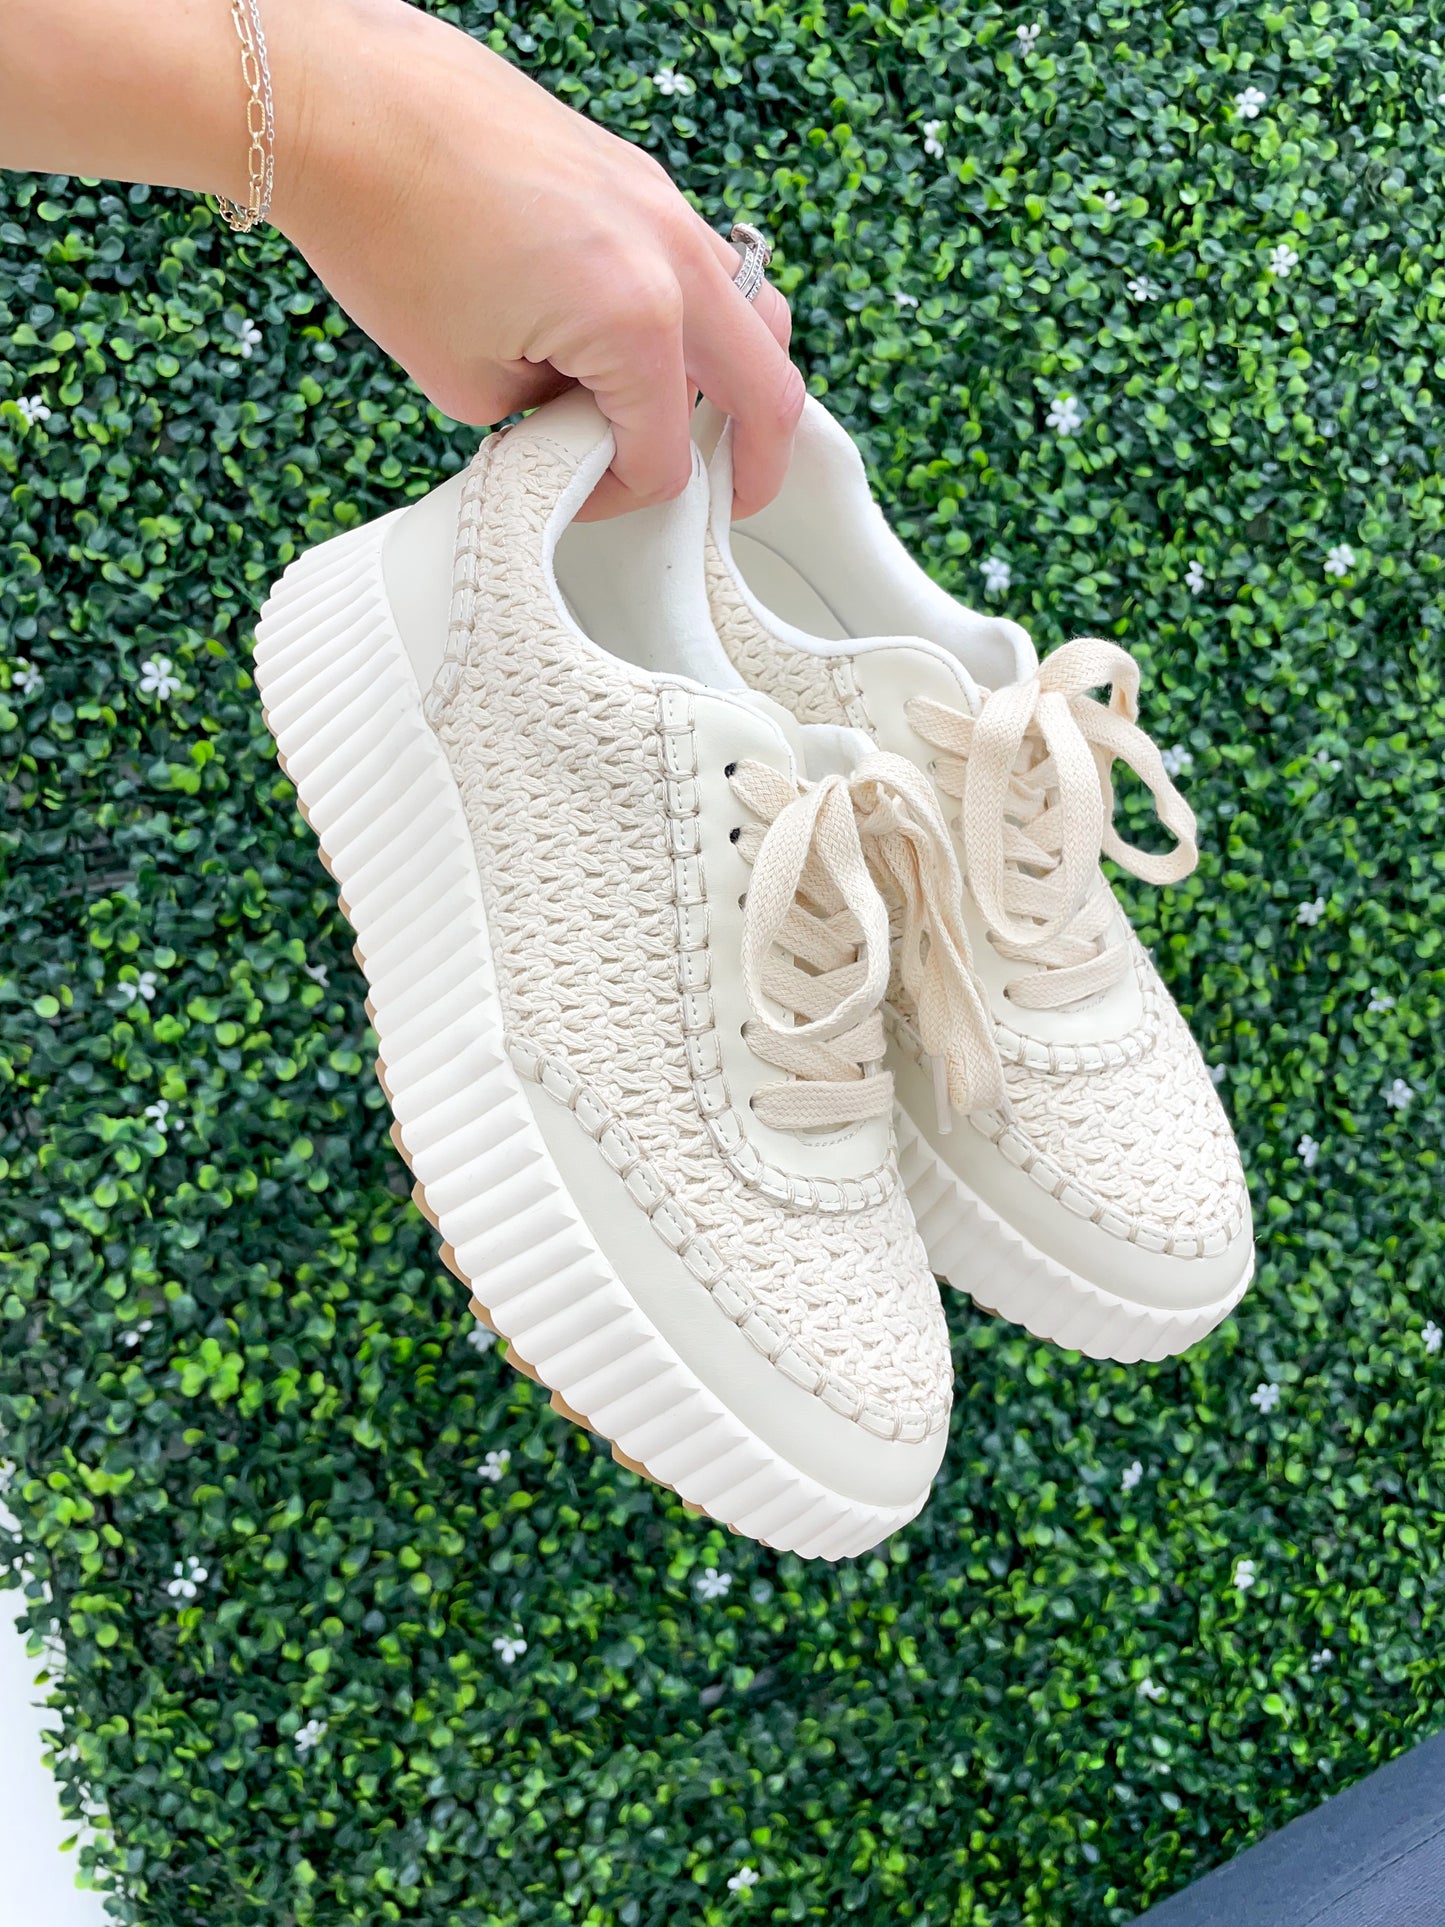 The Selina Woven Sneakers